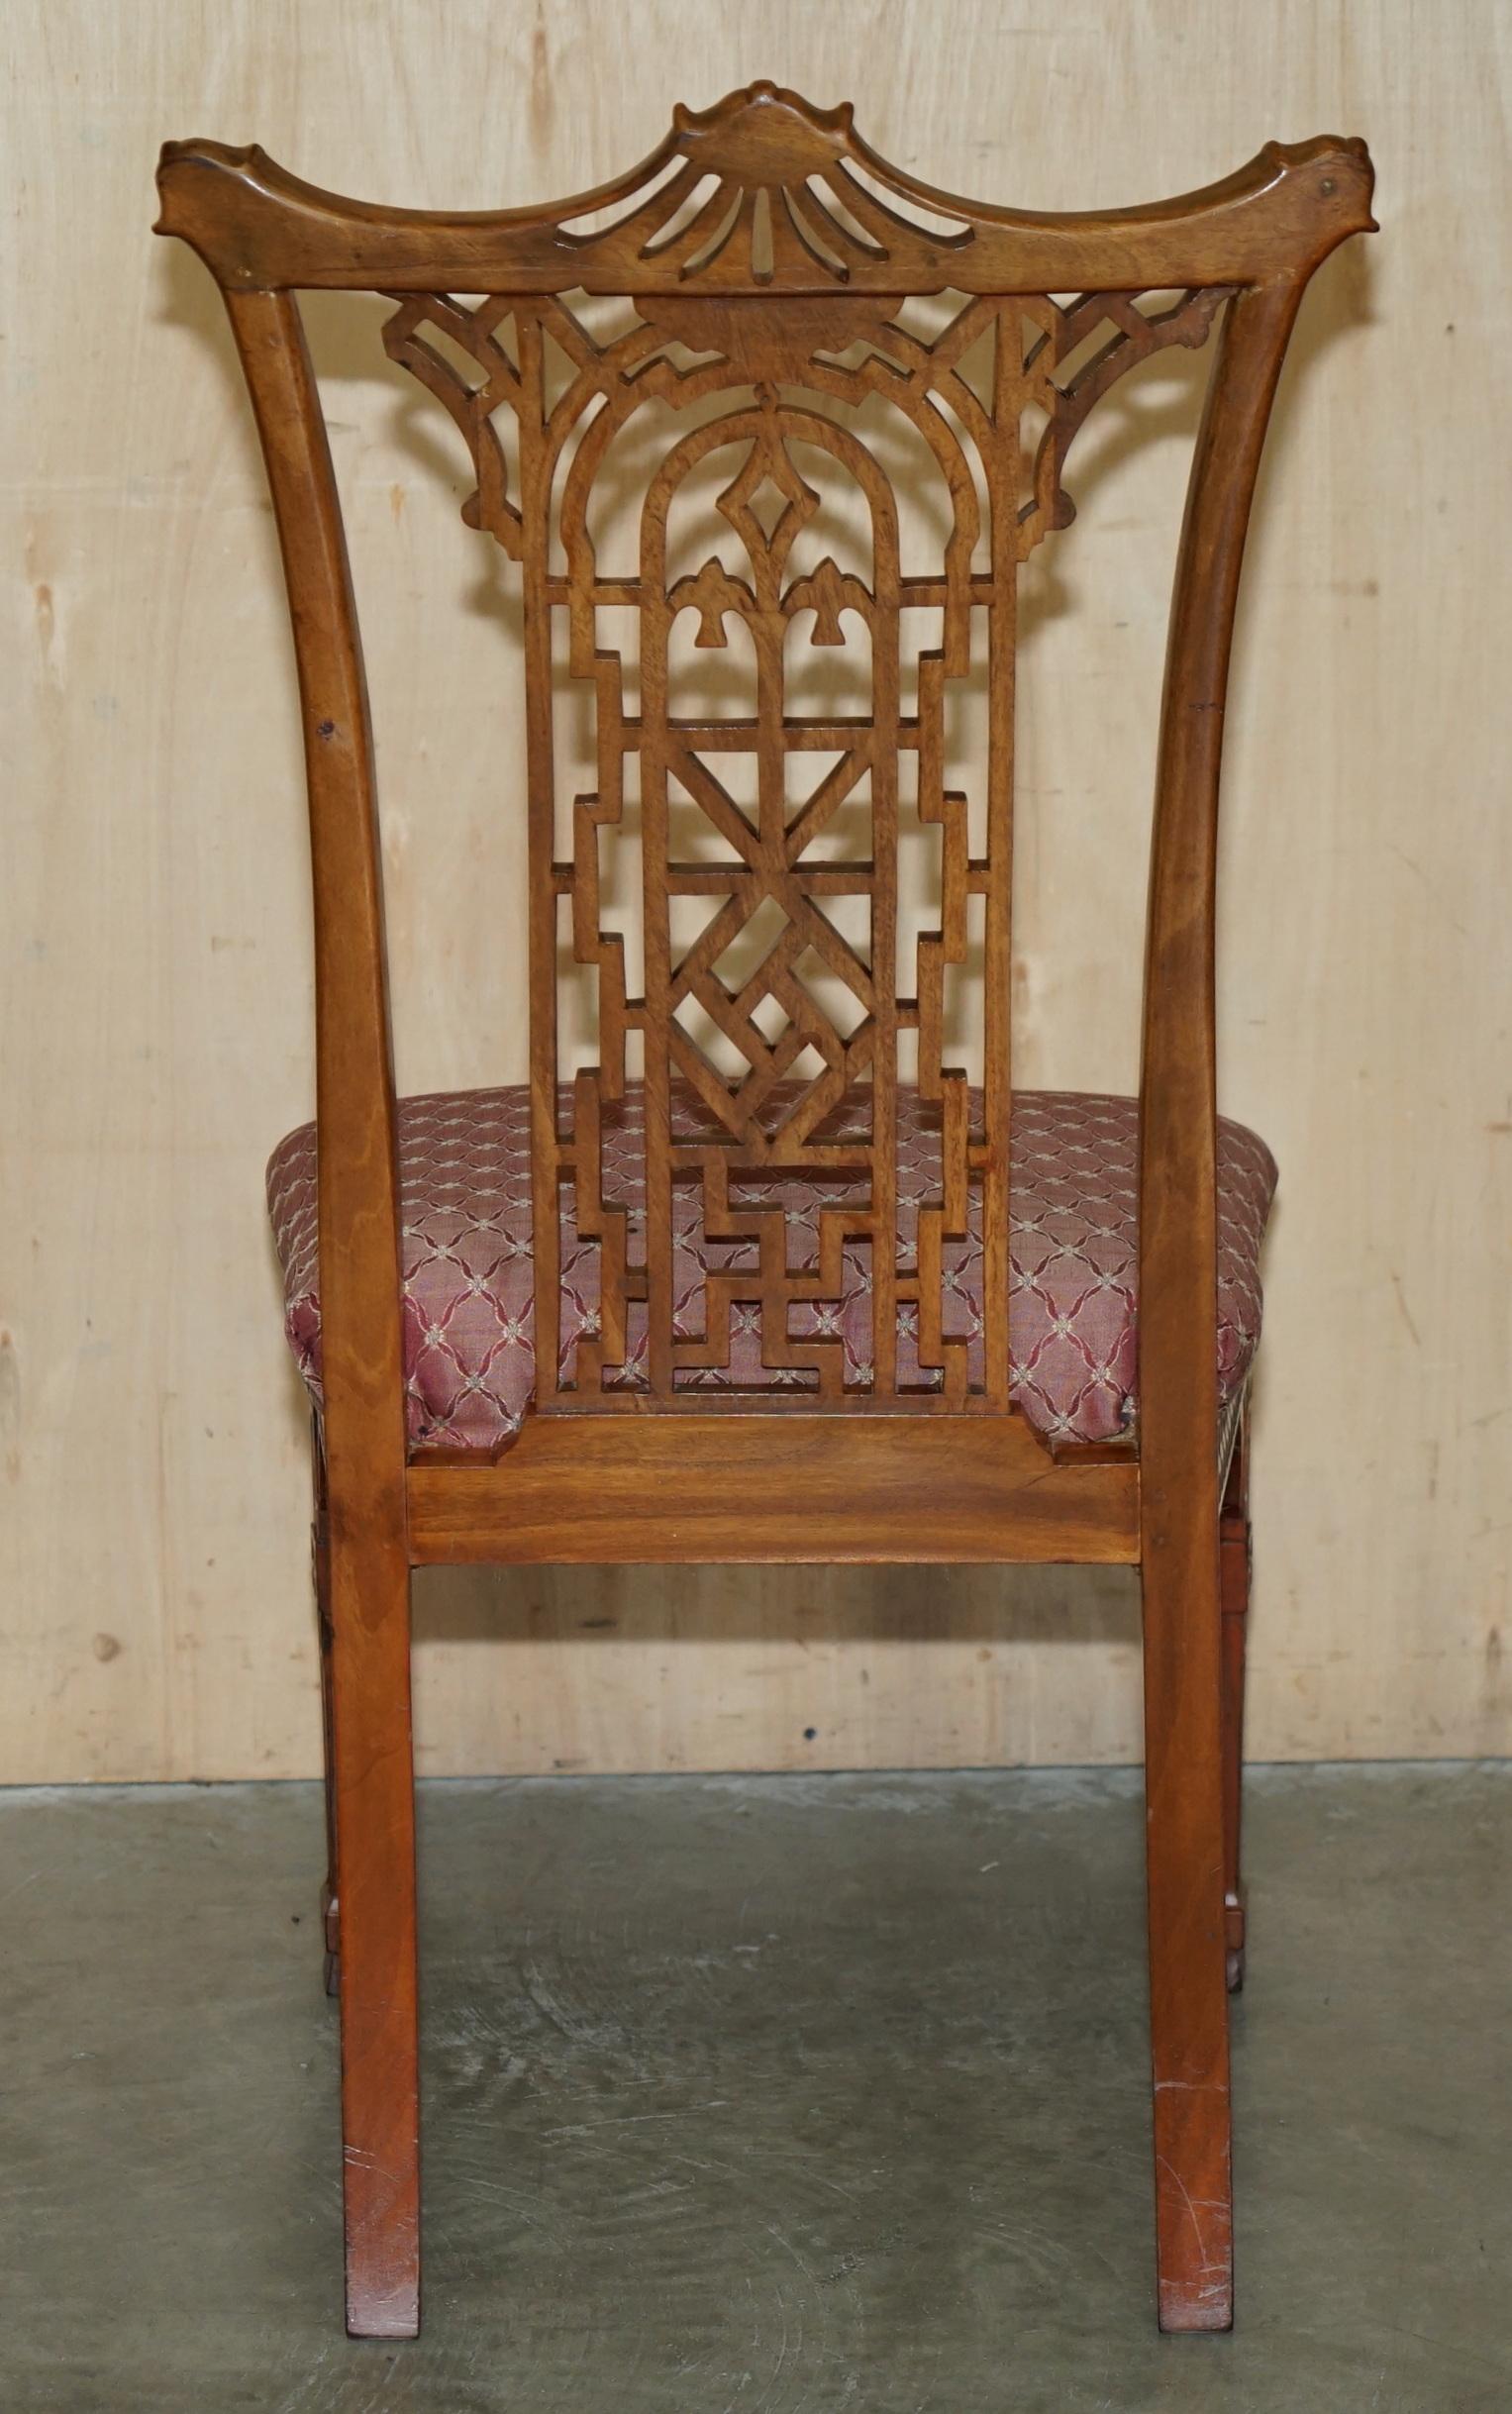 SIX EXQUISITE ViNTAGE THOMAS CHIPPENDALE CHINESE PAGODA TOP DINING CHAIRS For Sale 5